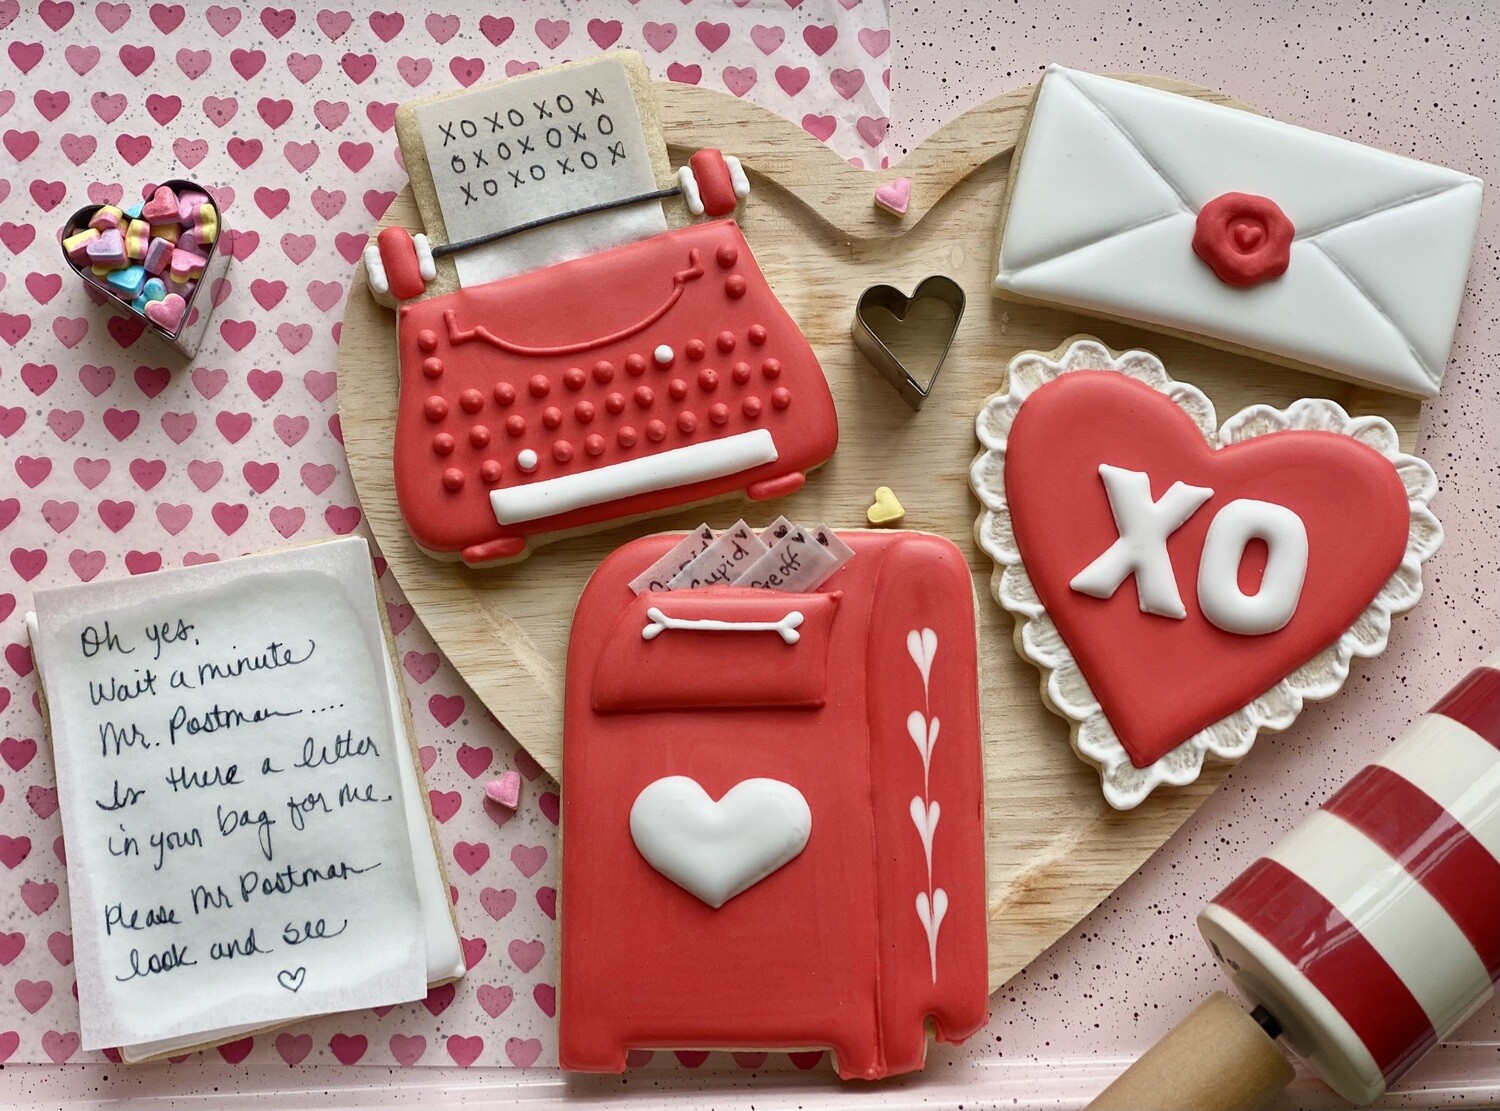 LOVE NOTES
Advanced Beginner Cookie Decorating Workshop
February 10th, 3:00-7:00pm